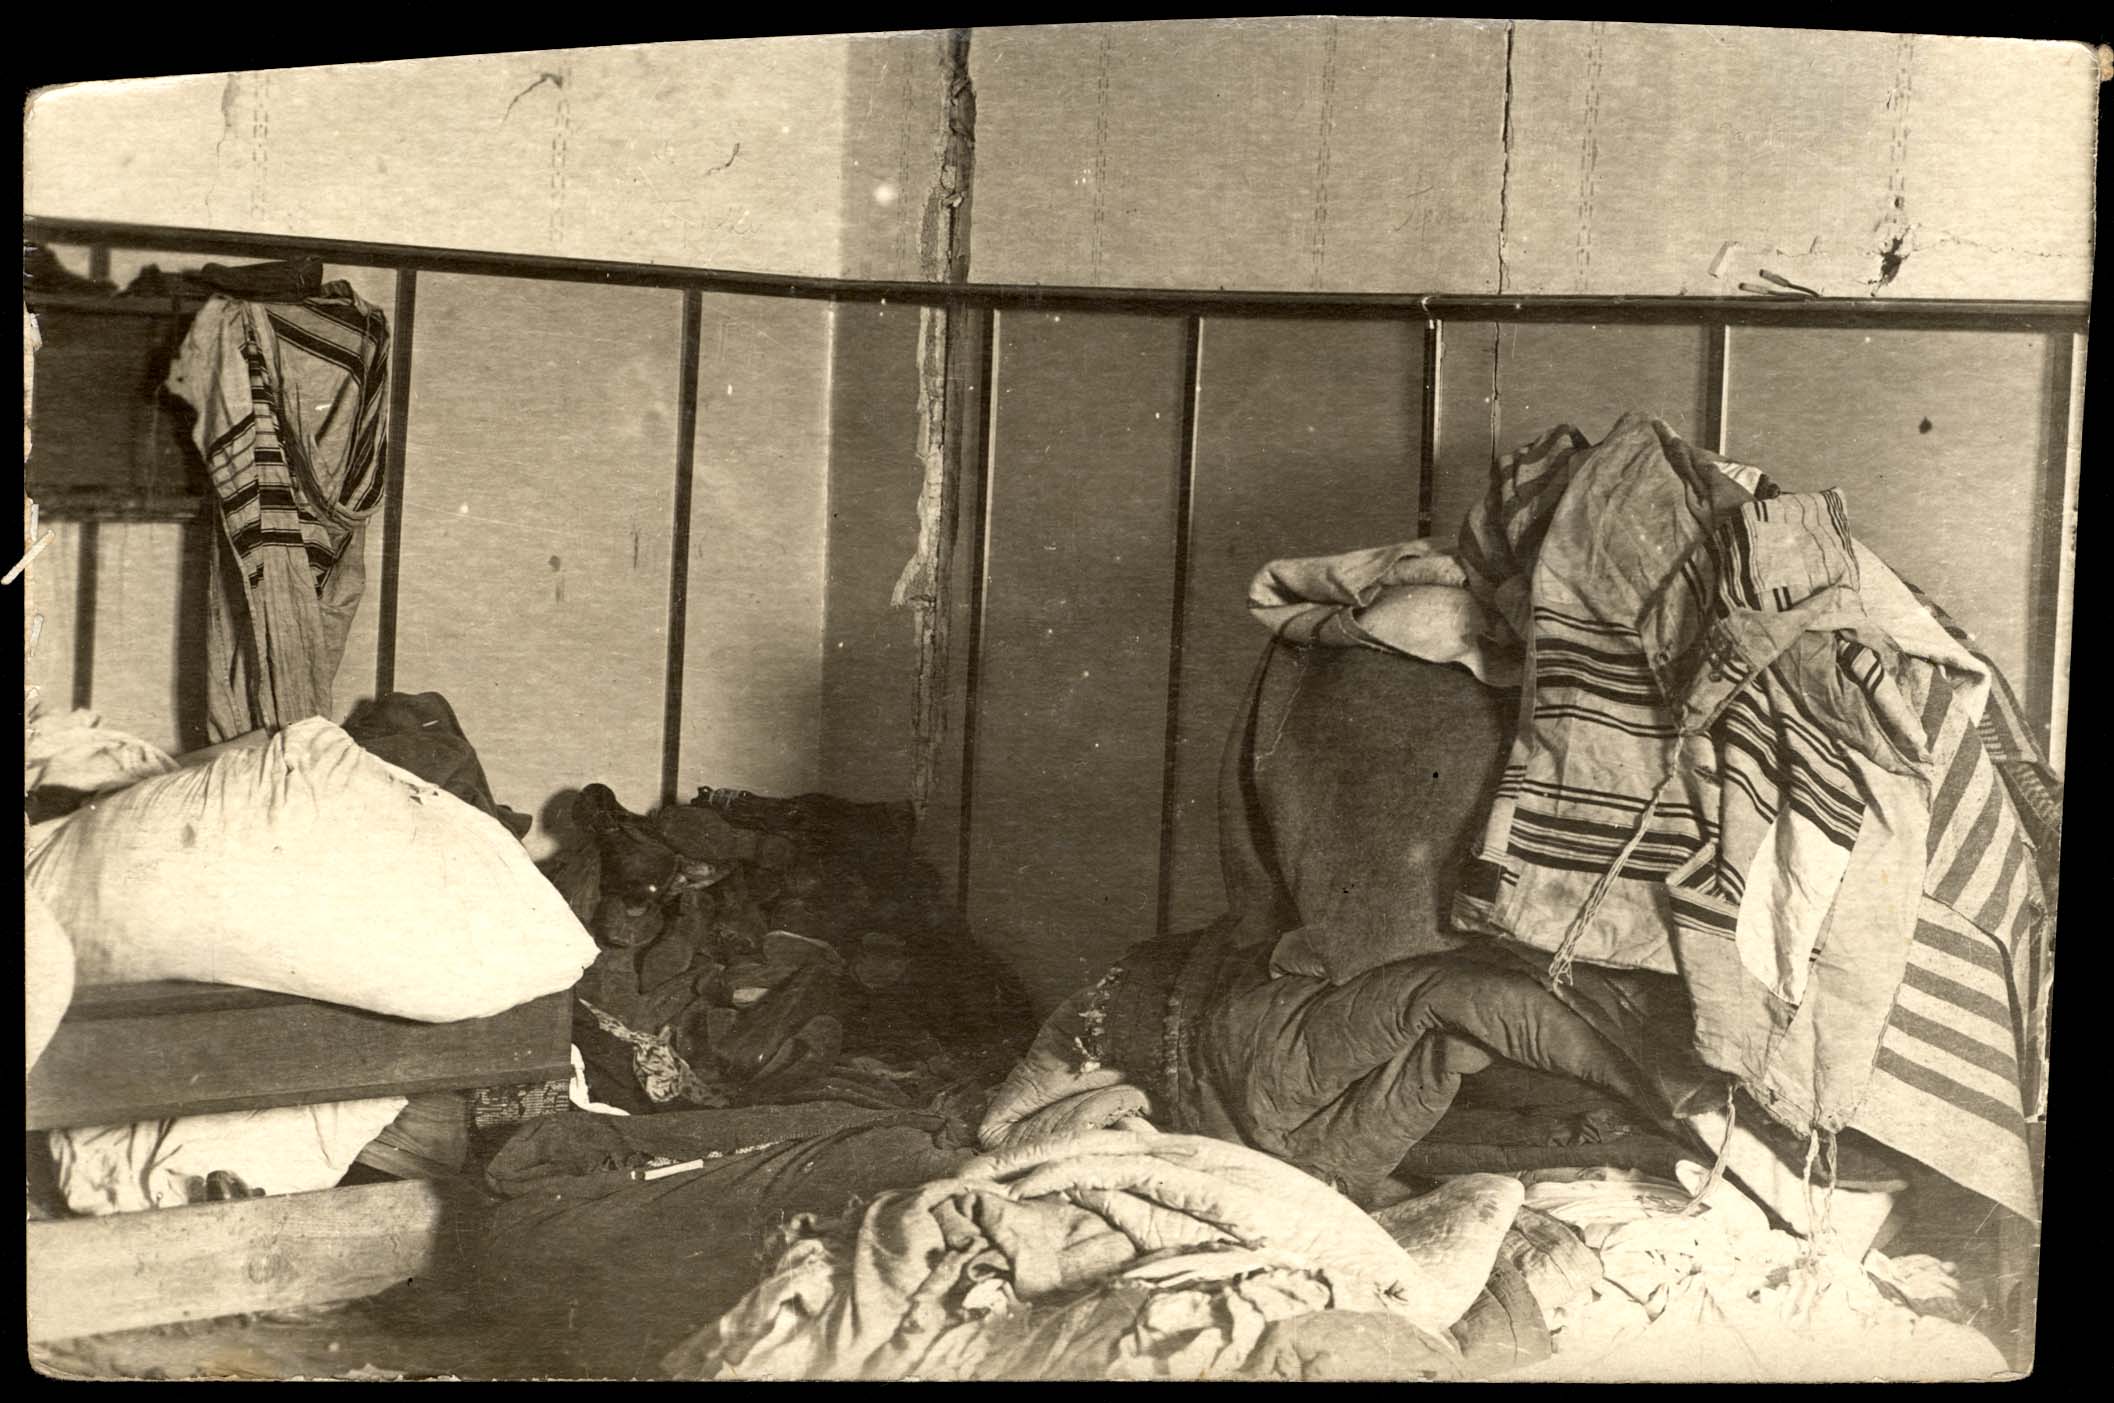 In the Kerch prison - a photo apparently taken by Red Army troops shortly after the first liberation of Kerch